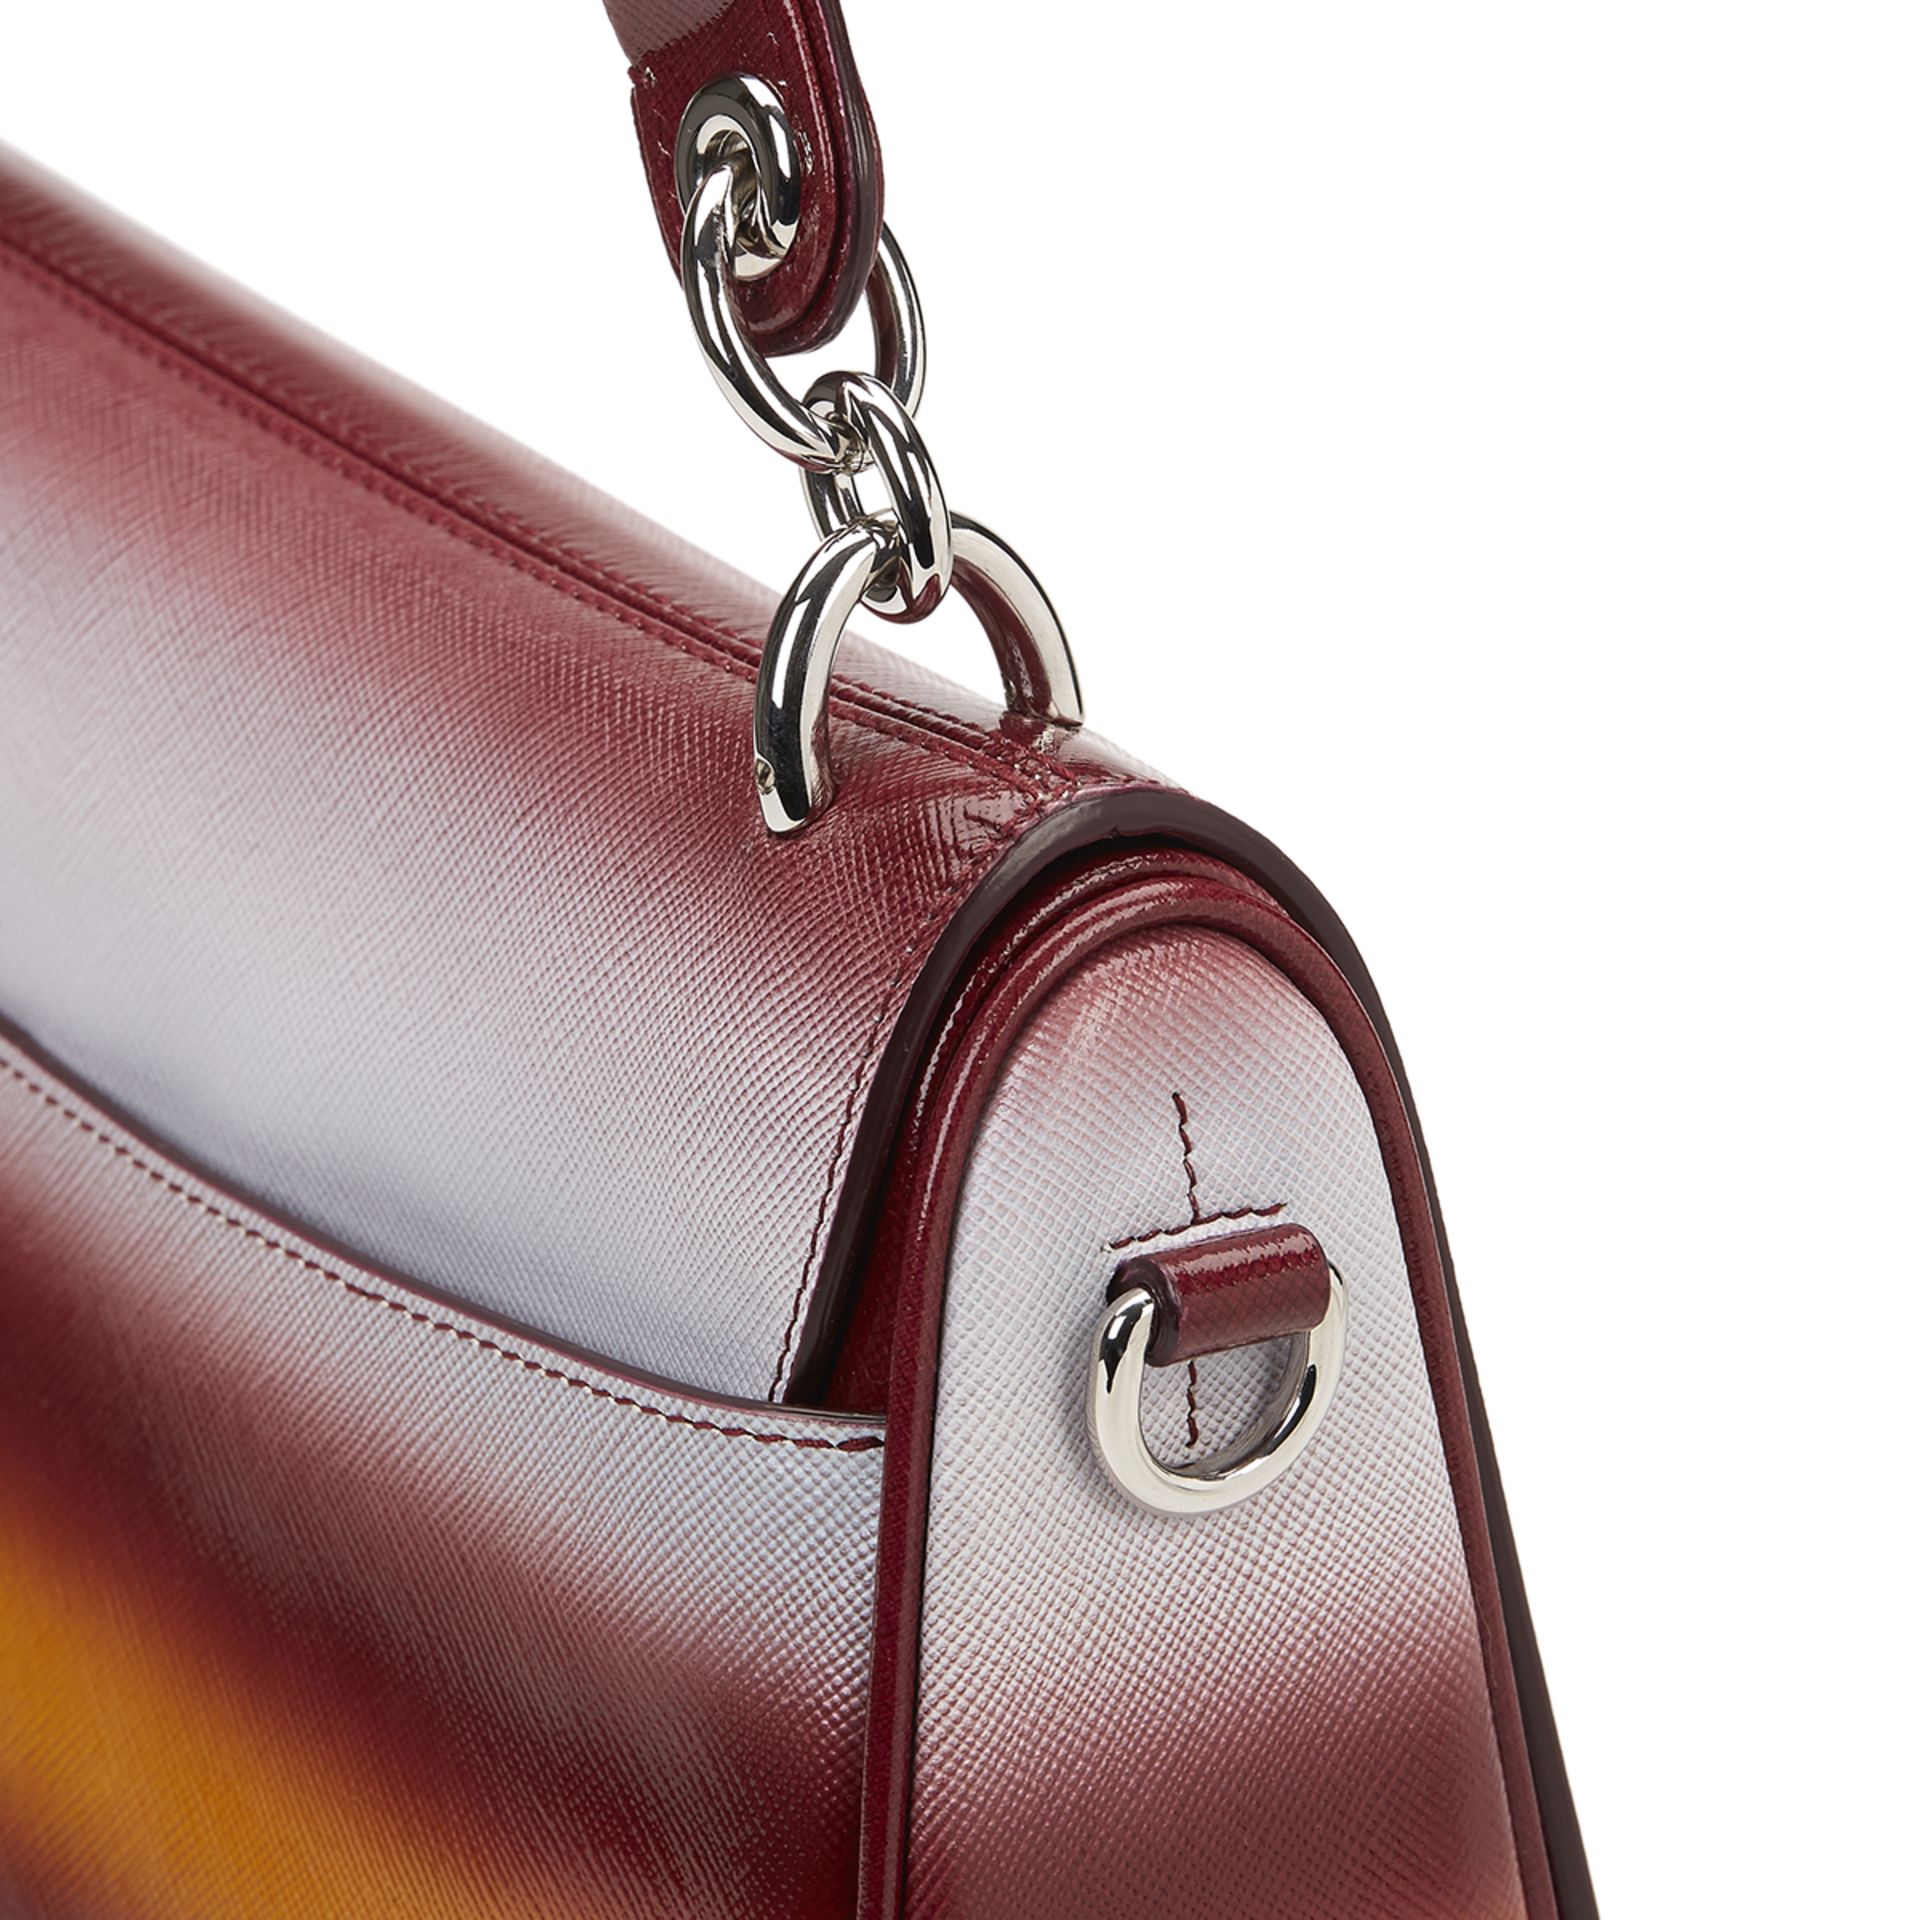 Christian Dior Maroon, Mustard & Blue Gradient Patent Leather Dune Bag - Image 7 of 11